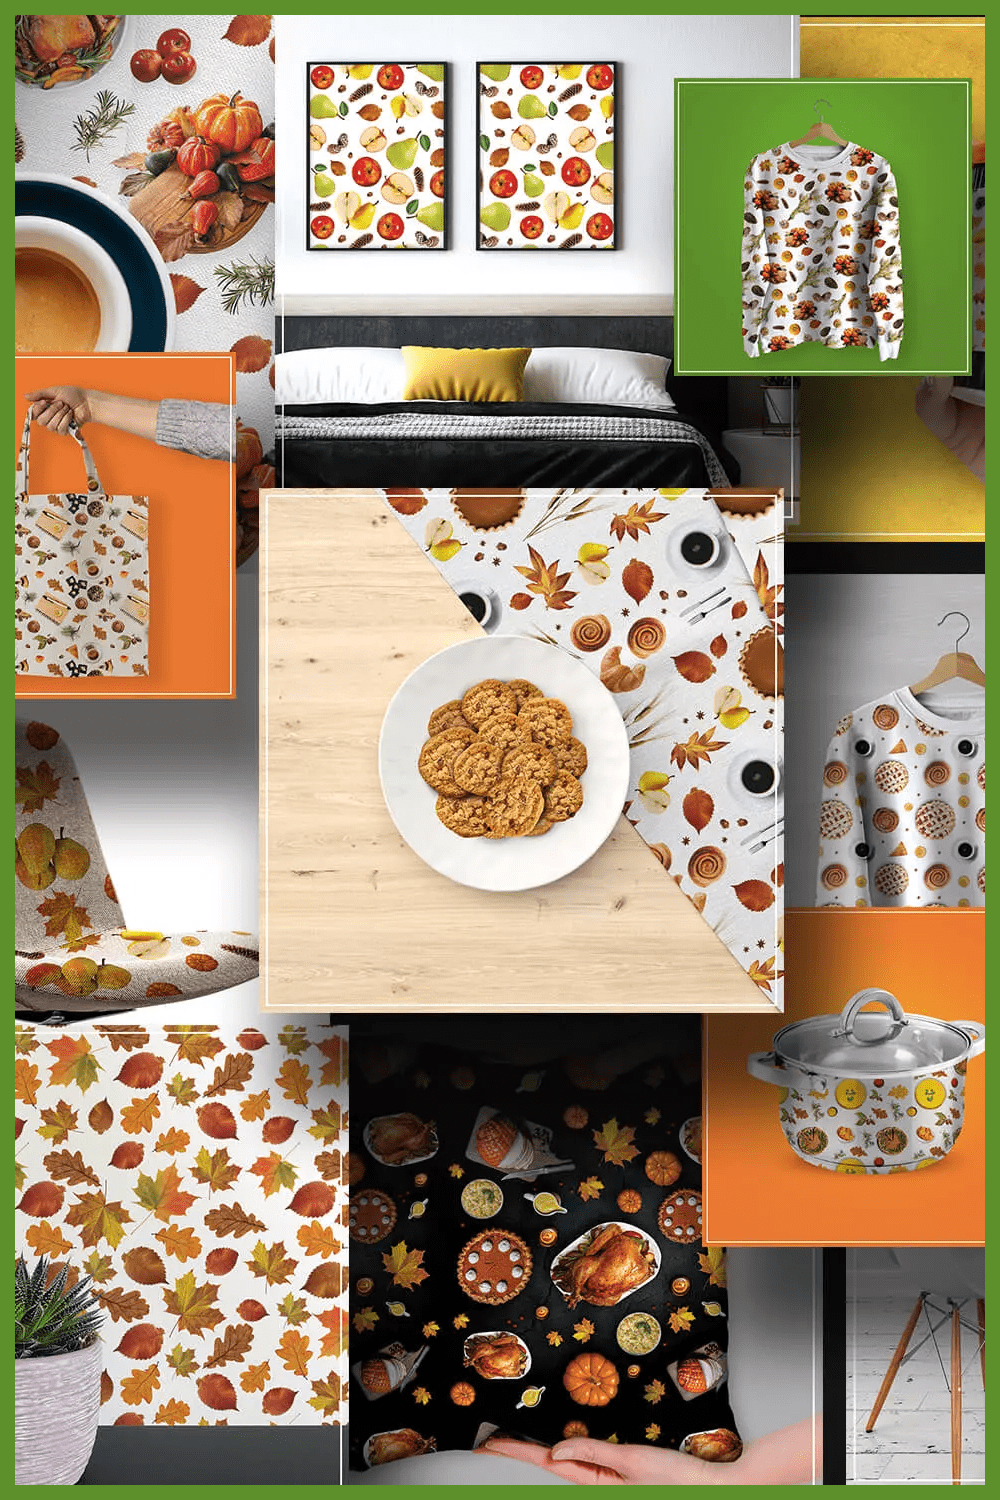 Collage of objects with prints in the form of pumpkins, apples, cookies, turkeys.